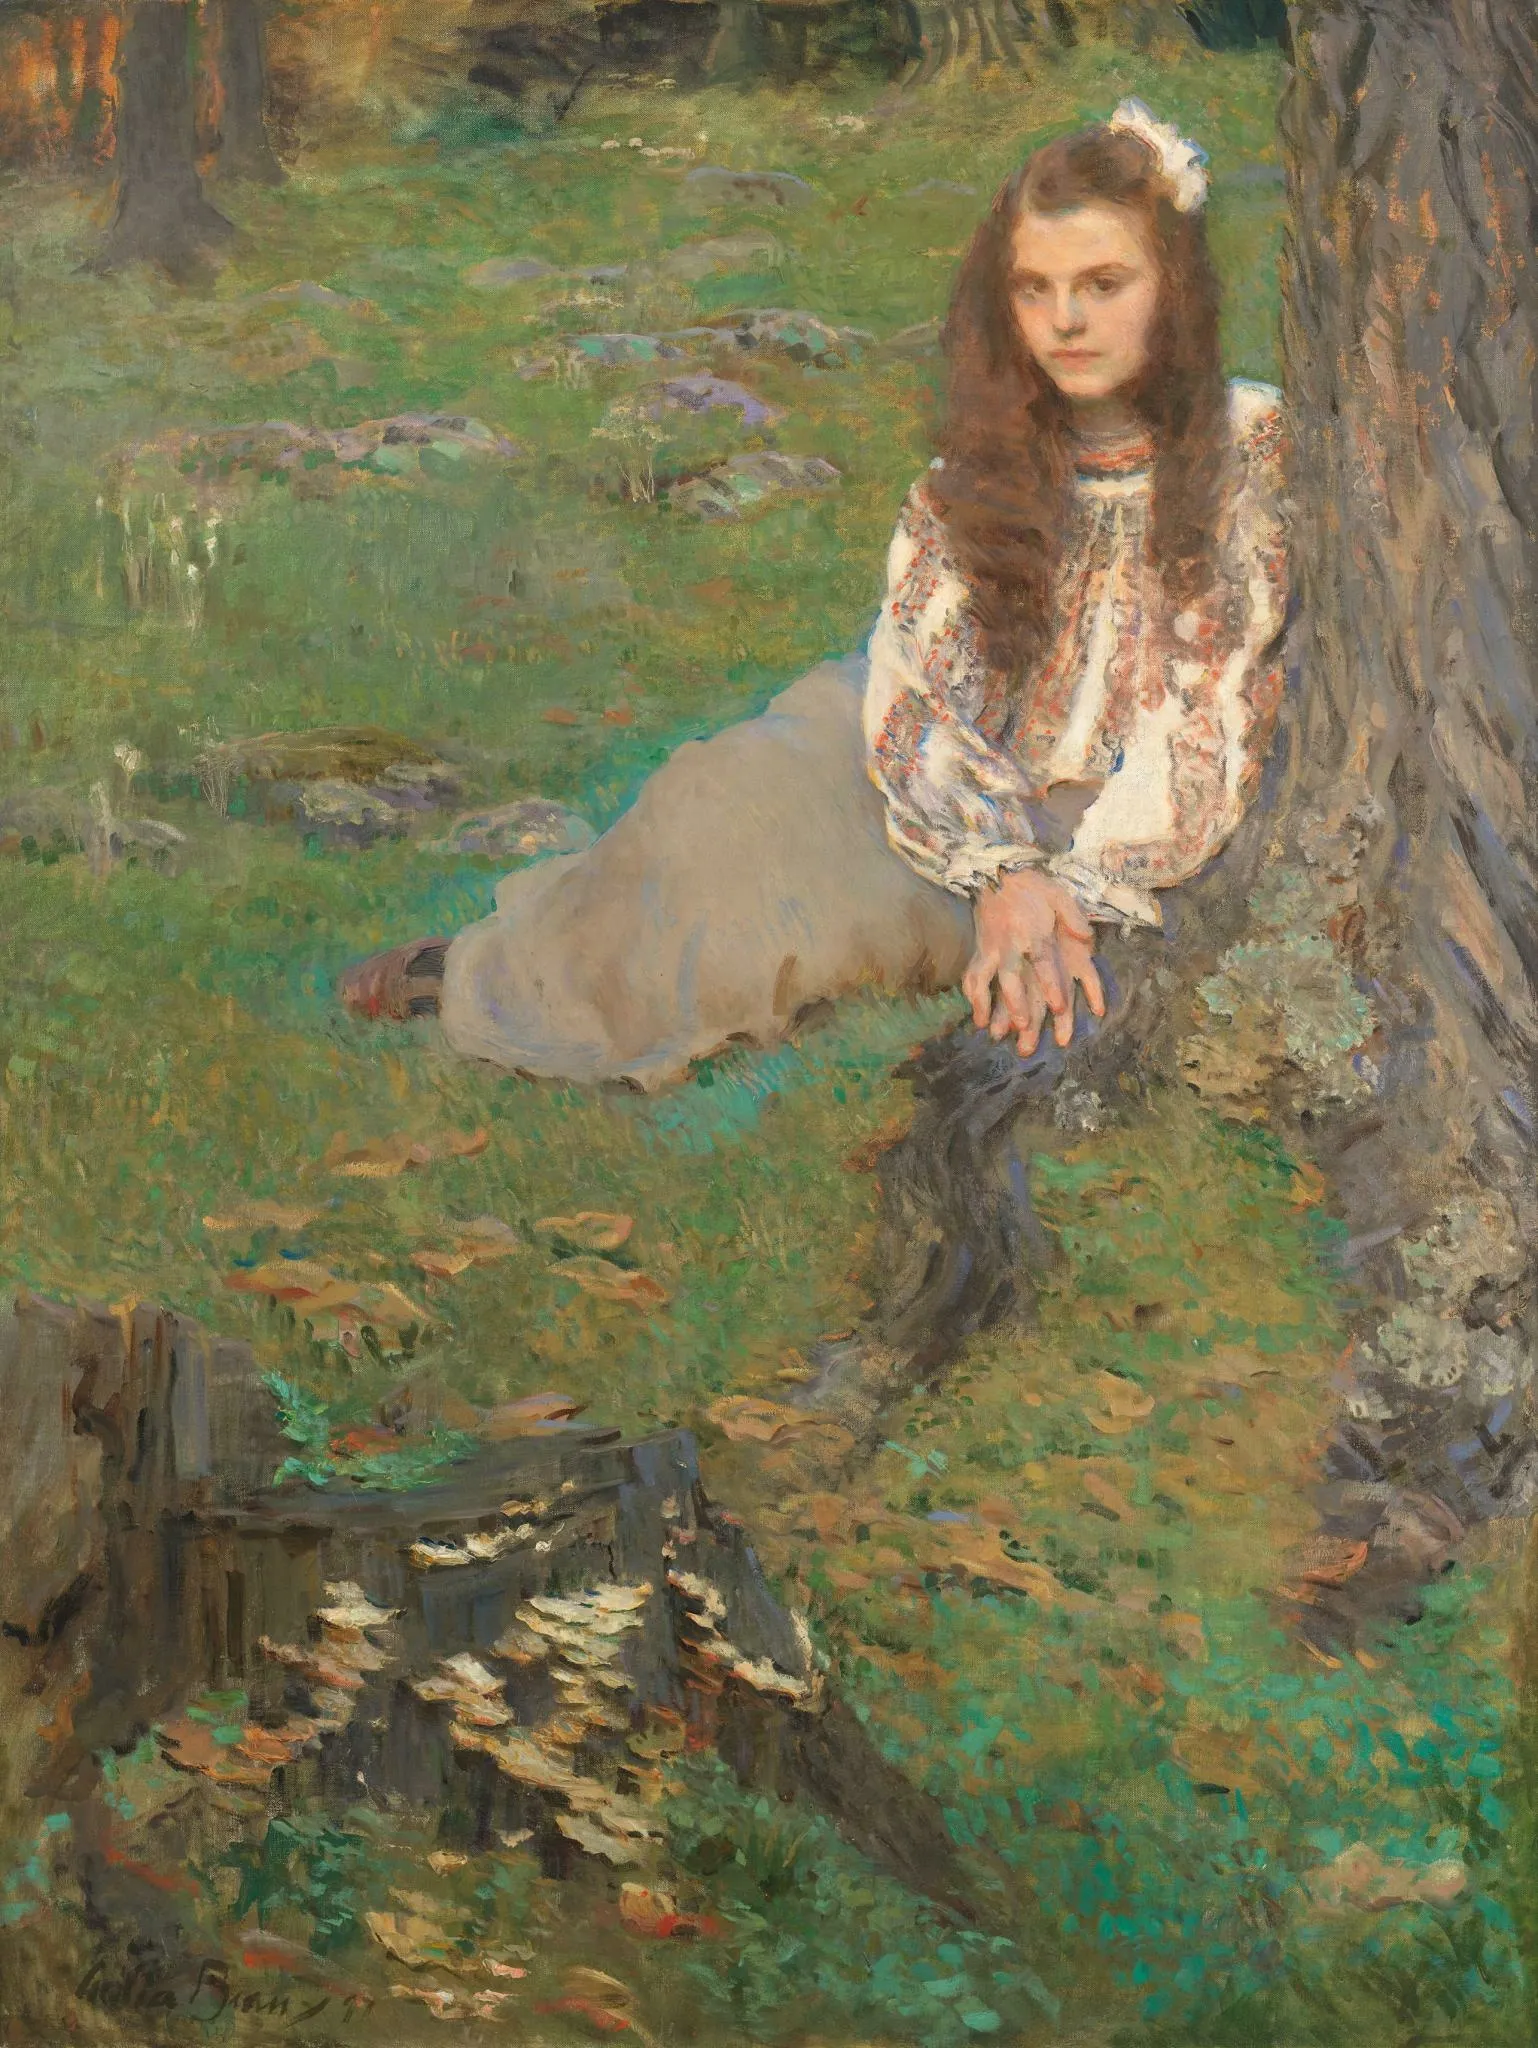 Cecelia-Beaux-Dorothea-in-the-Woods-1897-Whitney-Museum-of-American-Art